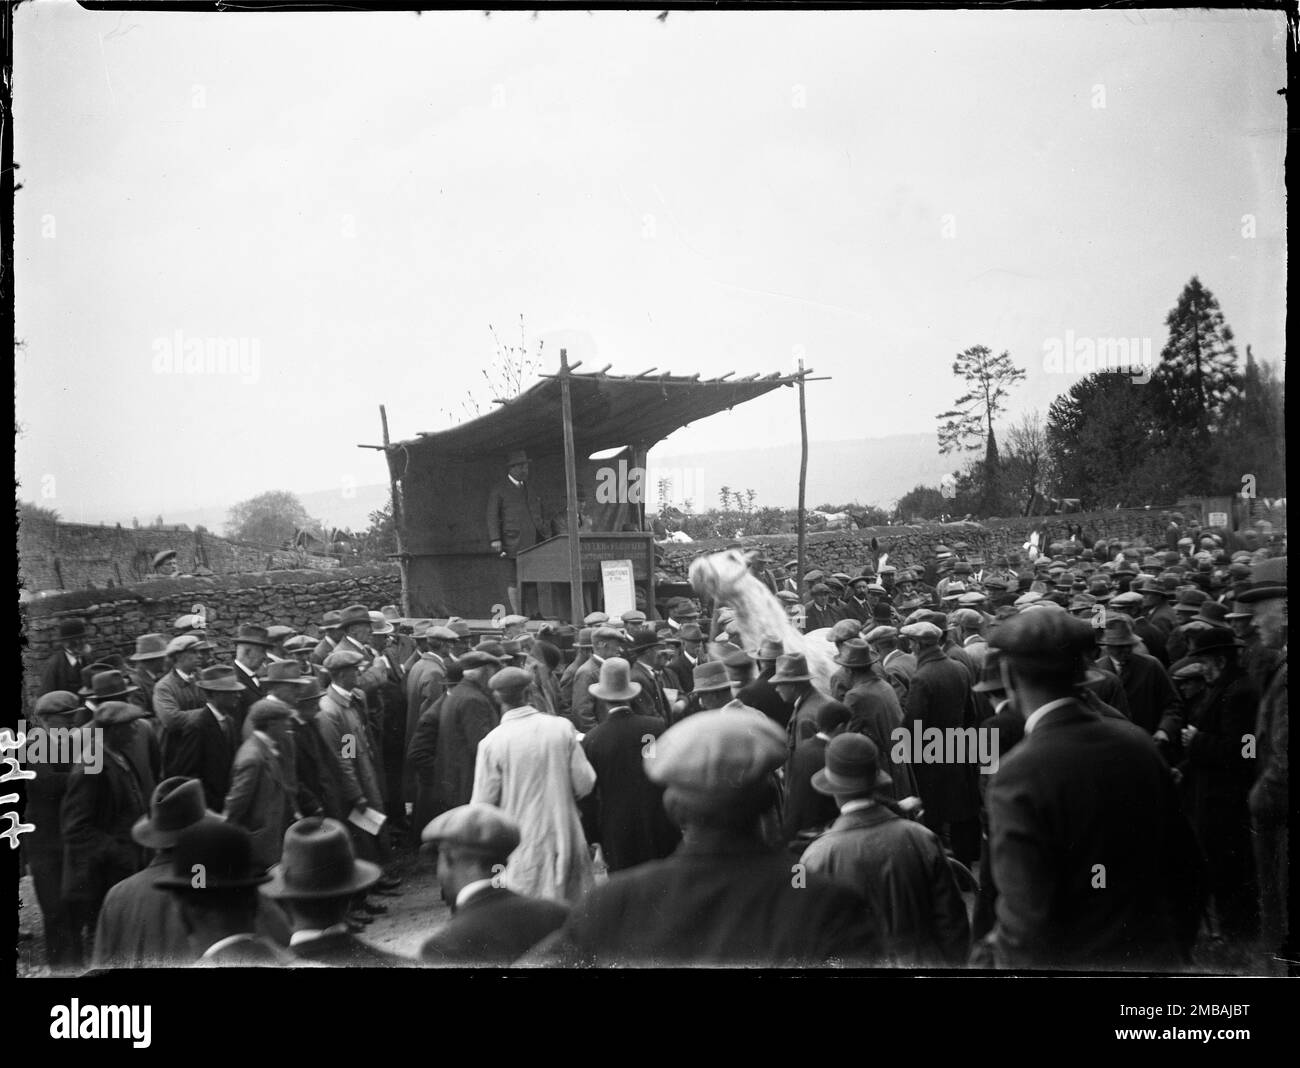 Stow-on-the-Wold, Cotswold, Gloucestershire, 1928. Looking over a crowd of men towards an auctioneers rostrum at the Stow Horse Fair, with a white horse at the centre of the crowd. The auctioneers on the rostrum are from Cotswold auctioneers and valuers Tayler &amp; Fletcher. Stock Photo